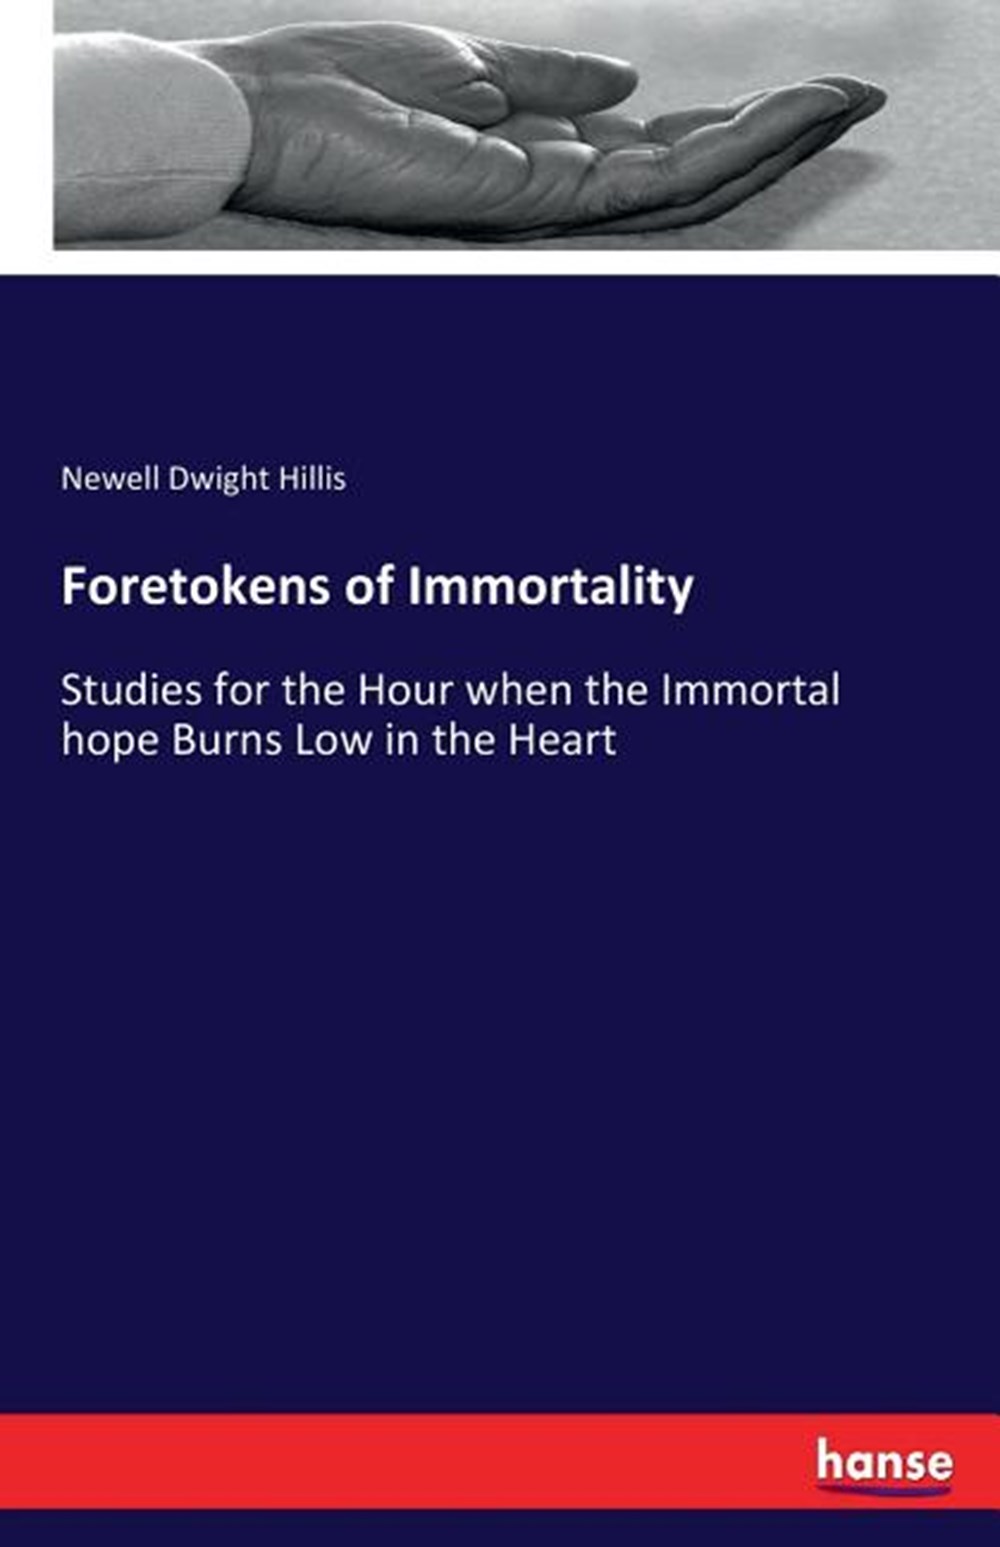 Foretokens of Immortality: Studies for the Hour when the Immortal hope Burns Low in the Heart